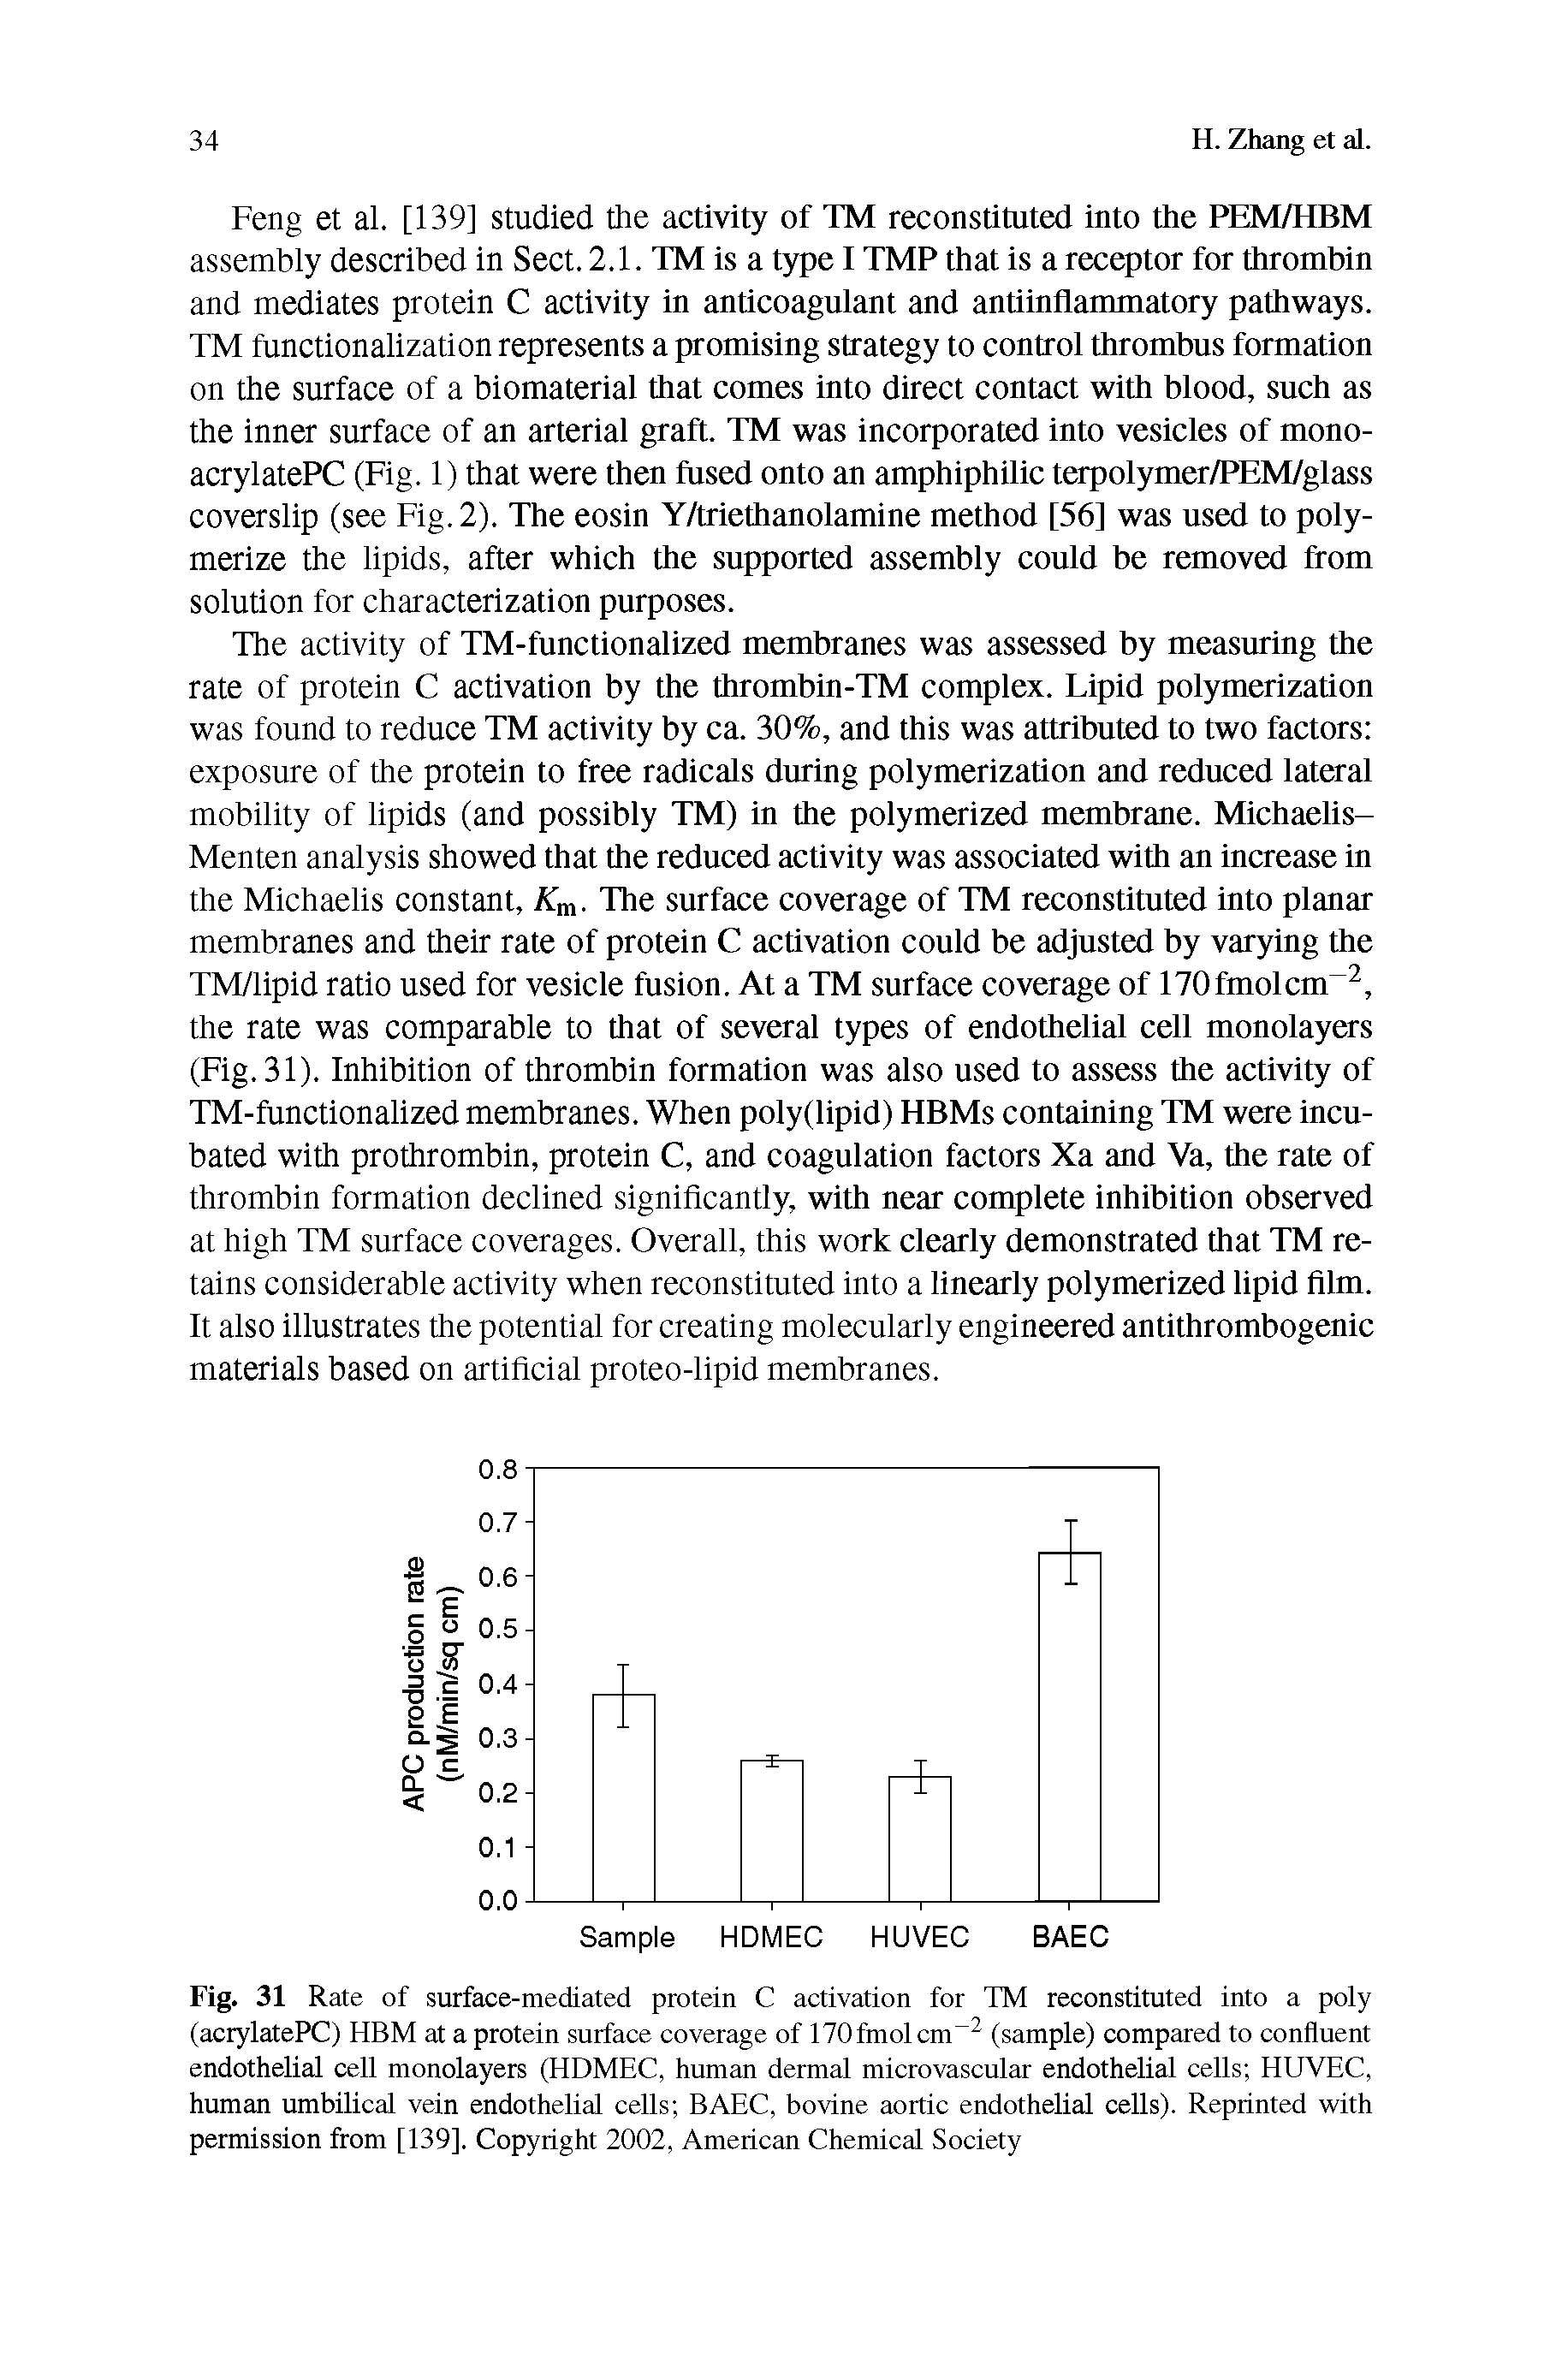 Fig. 31 Rate of surface-mediated protein C activation for TM reconstituted into a poly (acrylatePC) HBM at a protein surface coverage of 170fmolcm 2 (sample) compared to confluent endothelial cell monolayers (HDMEC, human dermal microvascular endothelial cells HUVEC, human umbilical vein endothelial cells BAEC, bovine aortic endothelial cells). Reprinted with permission from [139], Copyright 2002, American Chemical Society...